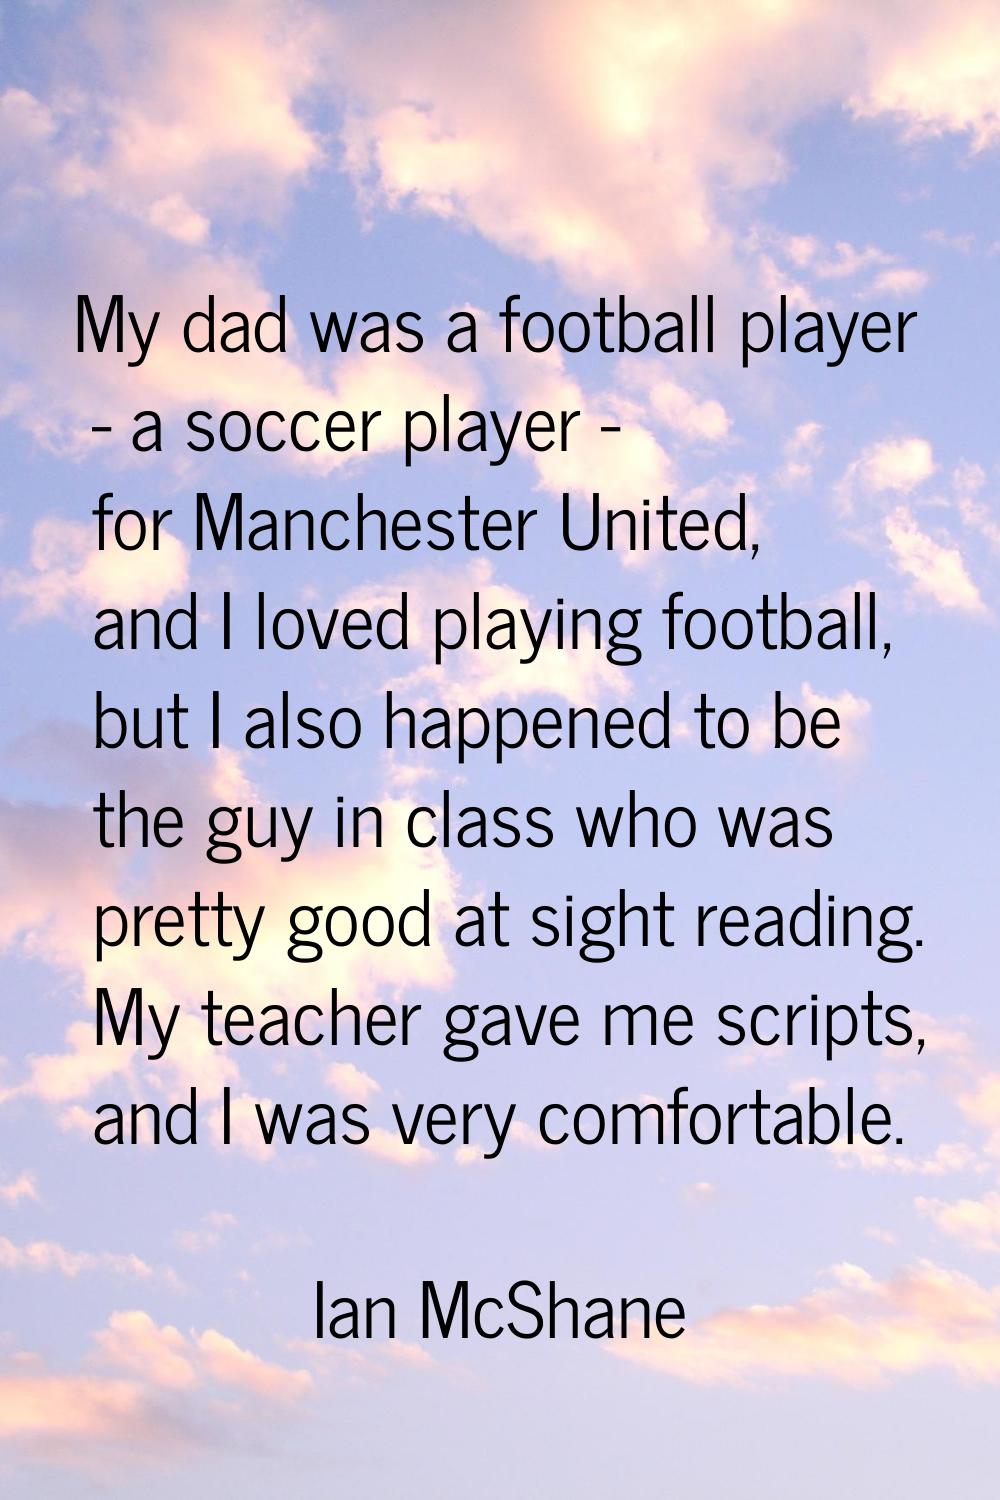 My dad was a football player - a soccer player - for Manchester United, and I loved playing footbal